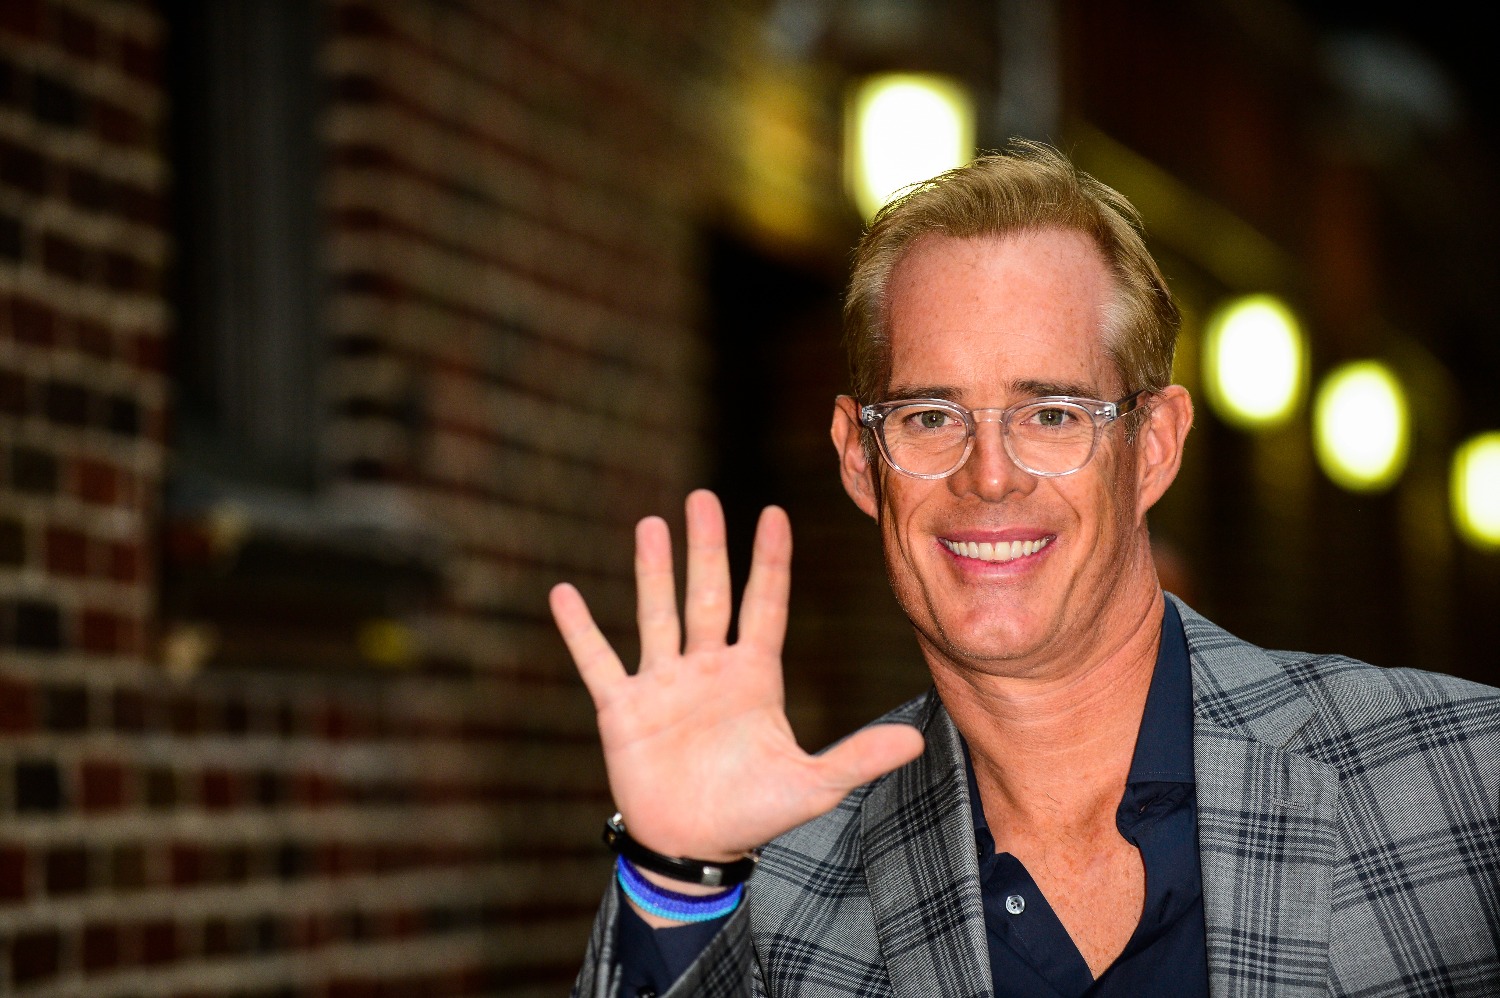 Joe Buck found out he will be inducted in the Pro Football Hall of Fame during Thursday Night Football.